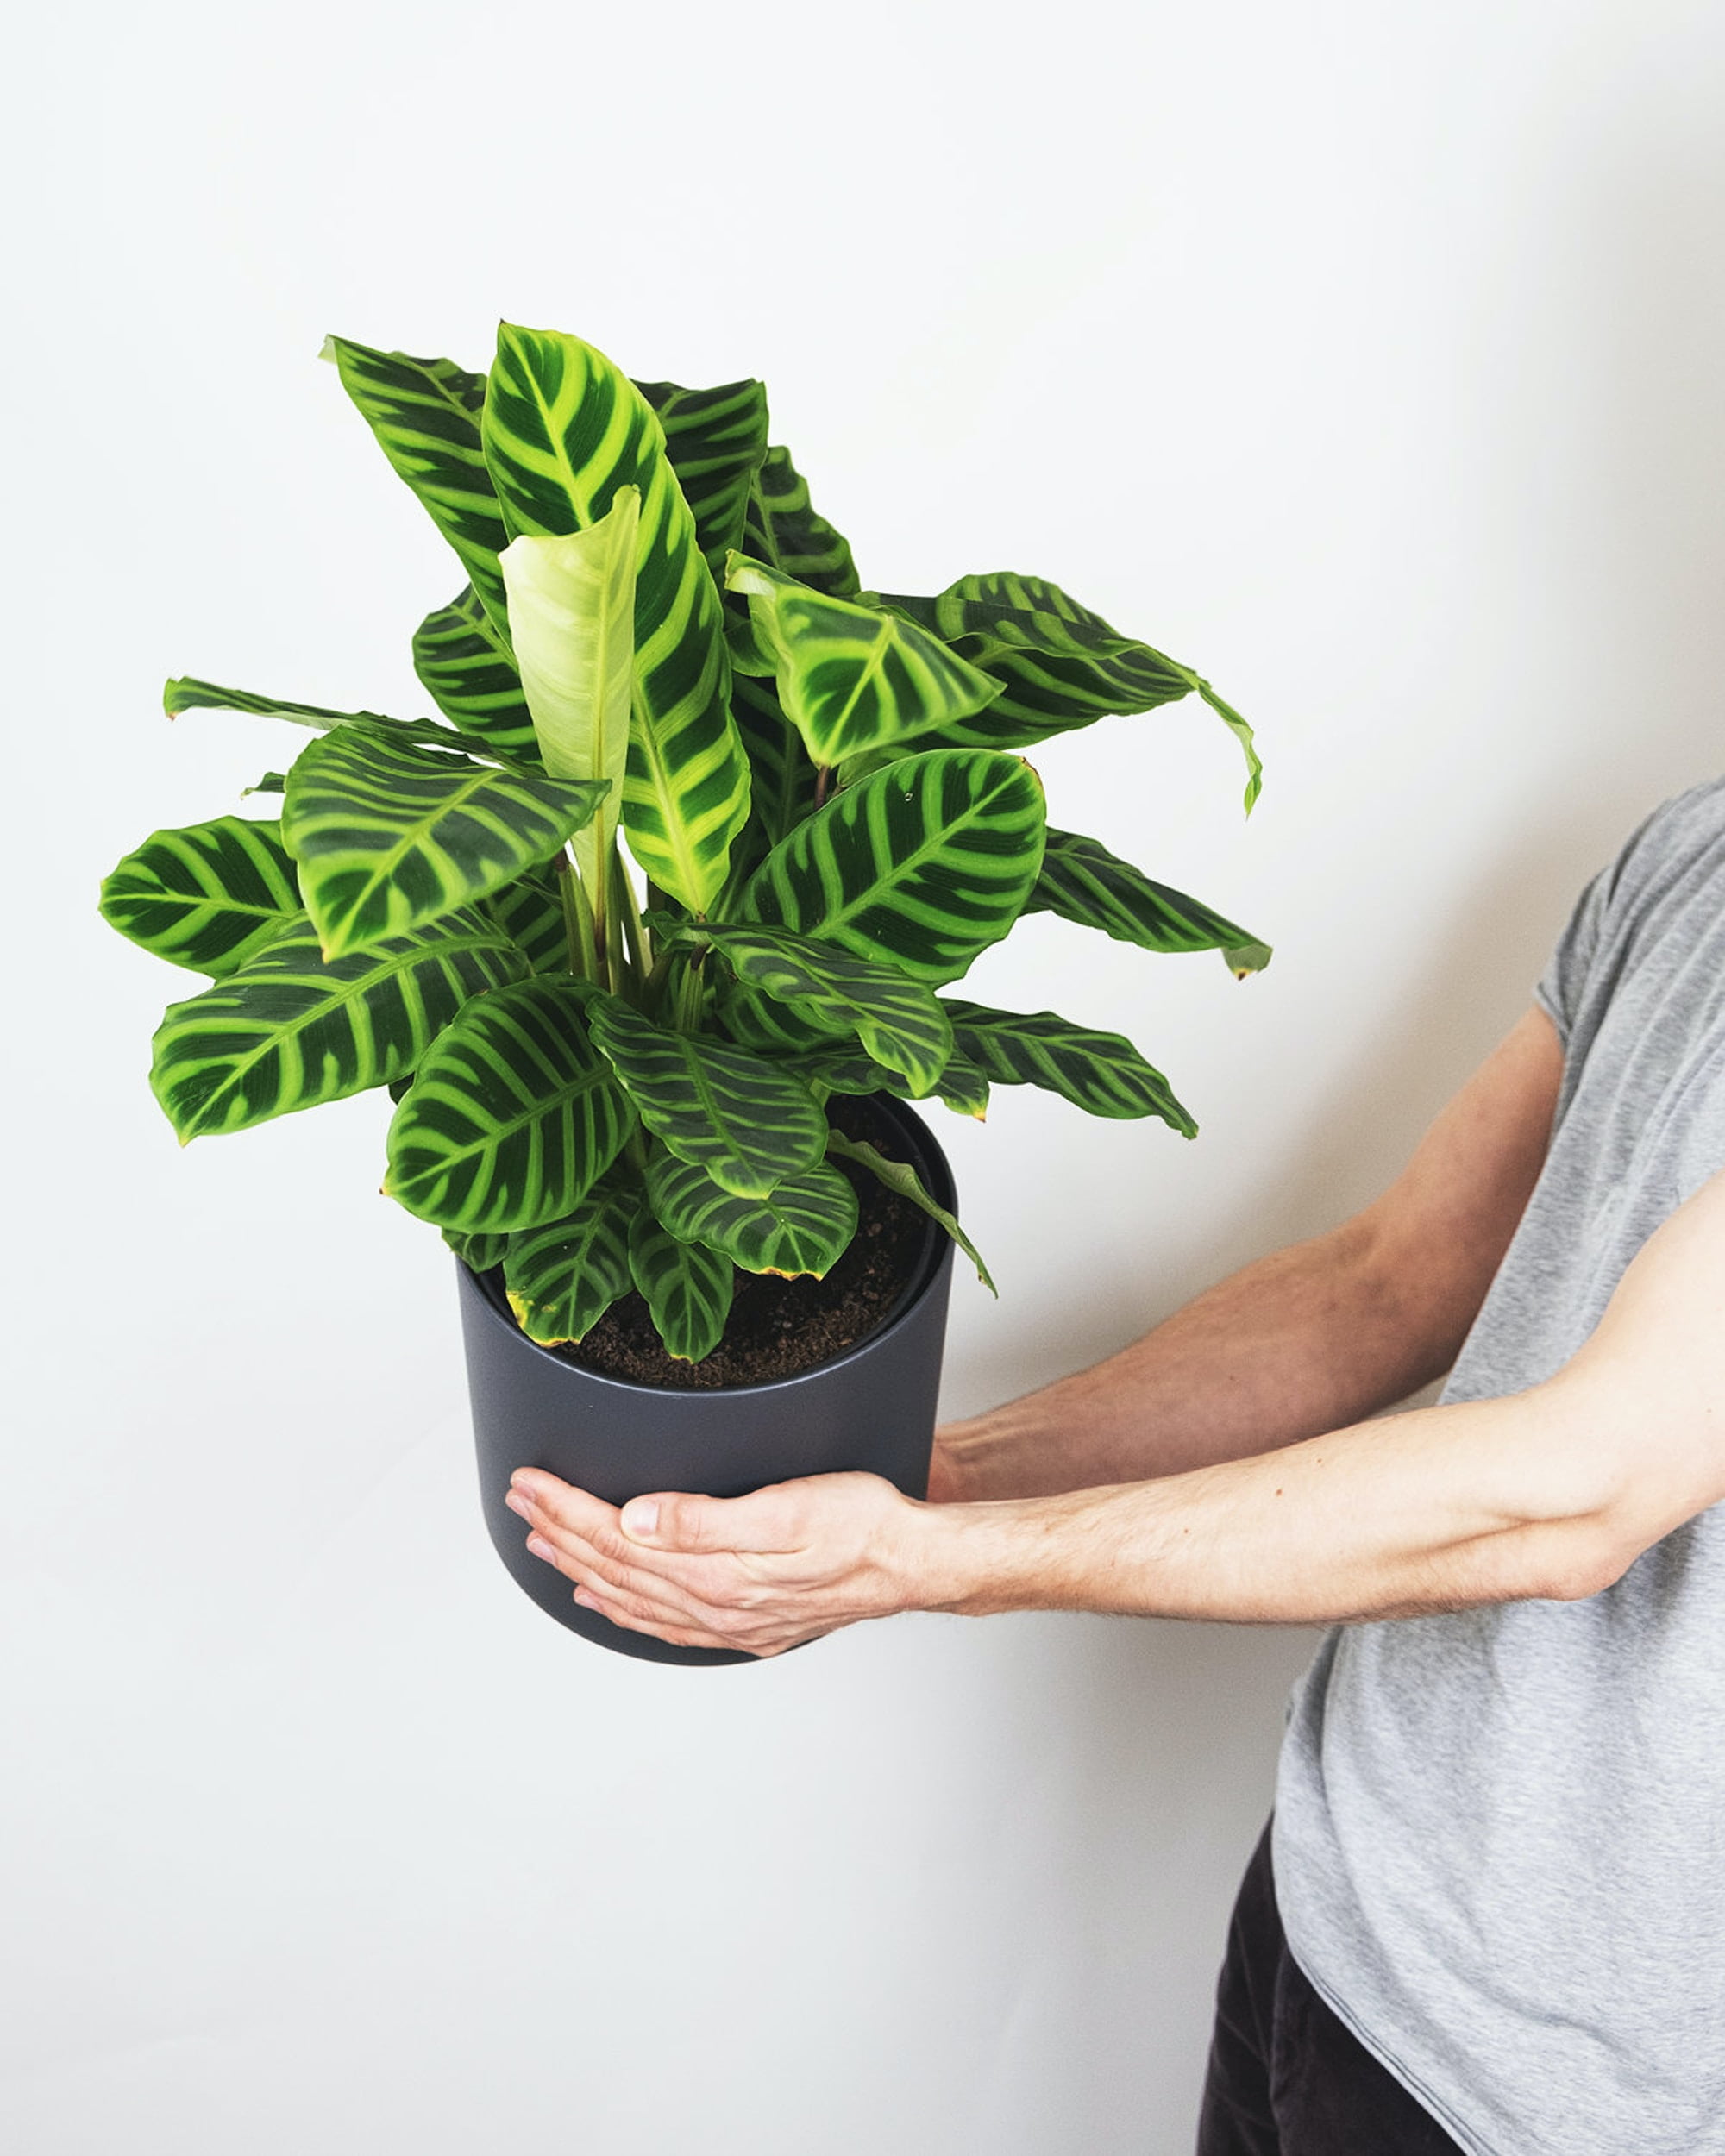 Why Are Your Calathea Leaves Curling?